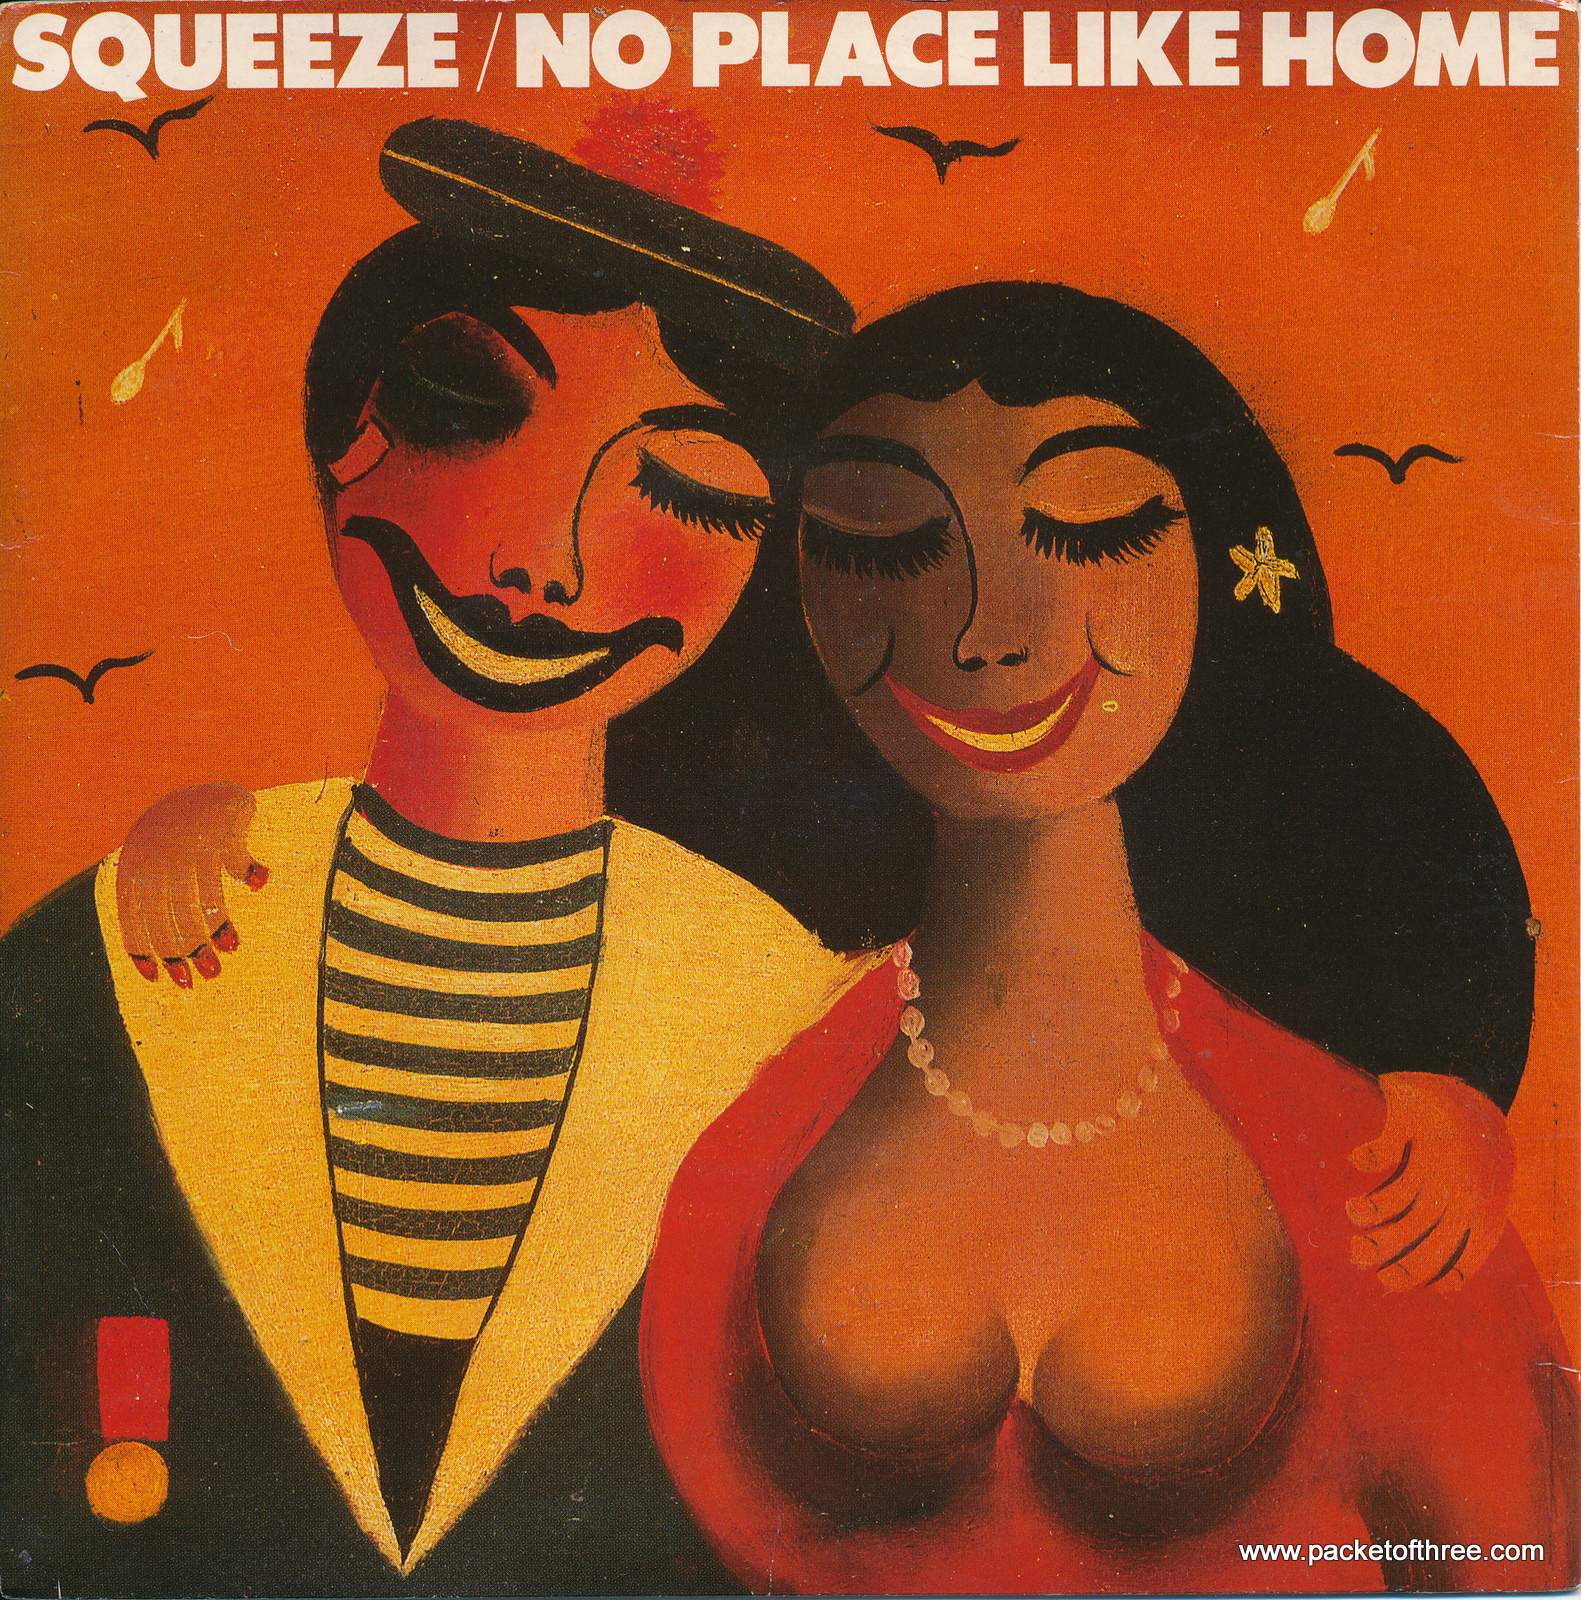 Squeeze - No Place Like Home - UK - 7" - picture sleeve